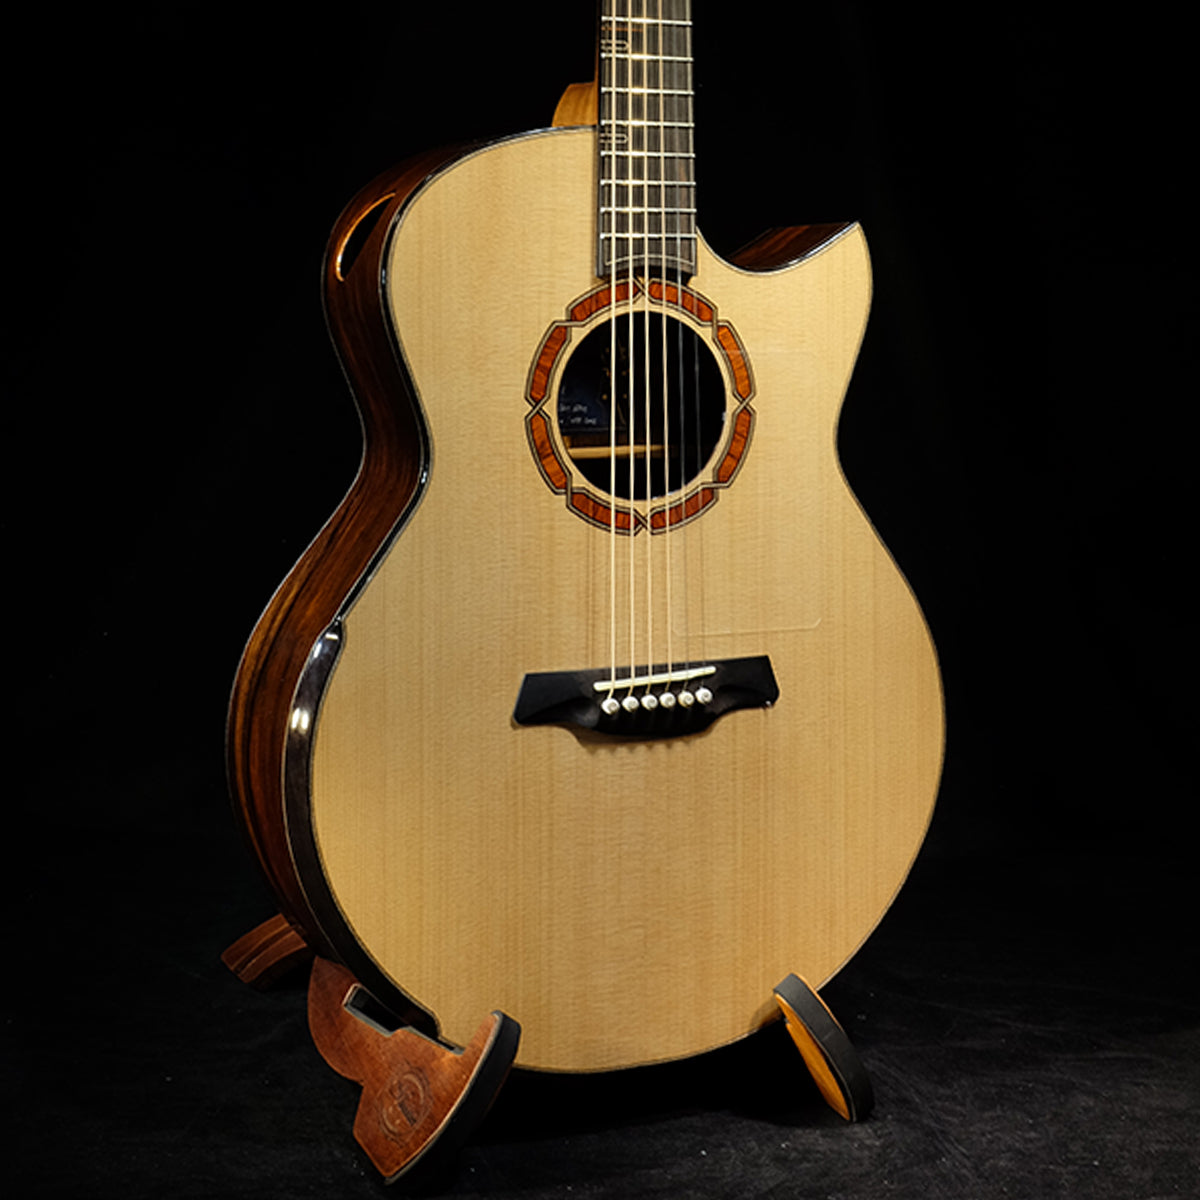 Blue Label SJ Sitka Spruce with Mexican Cocobolo | #11